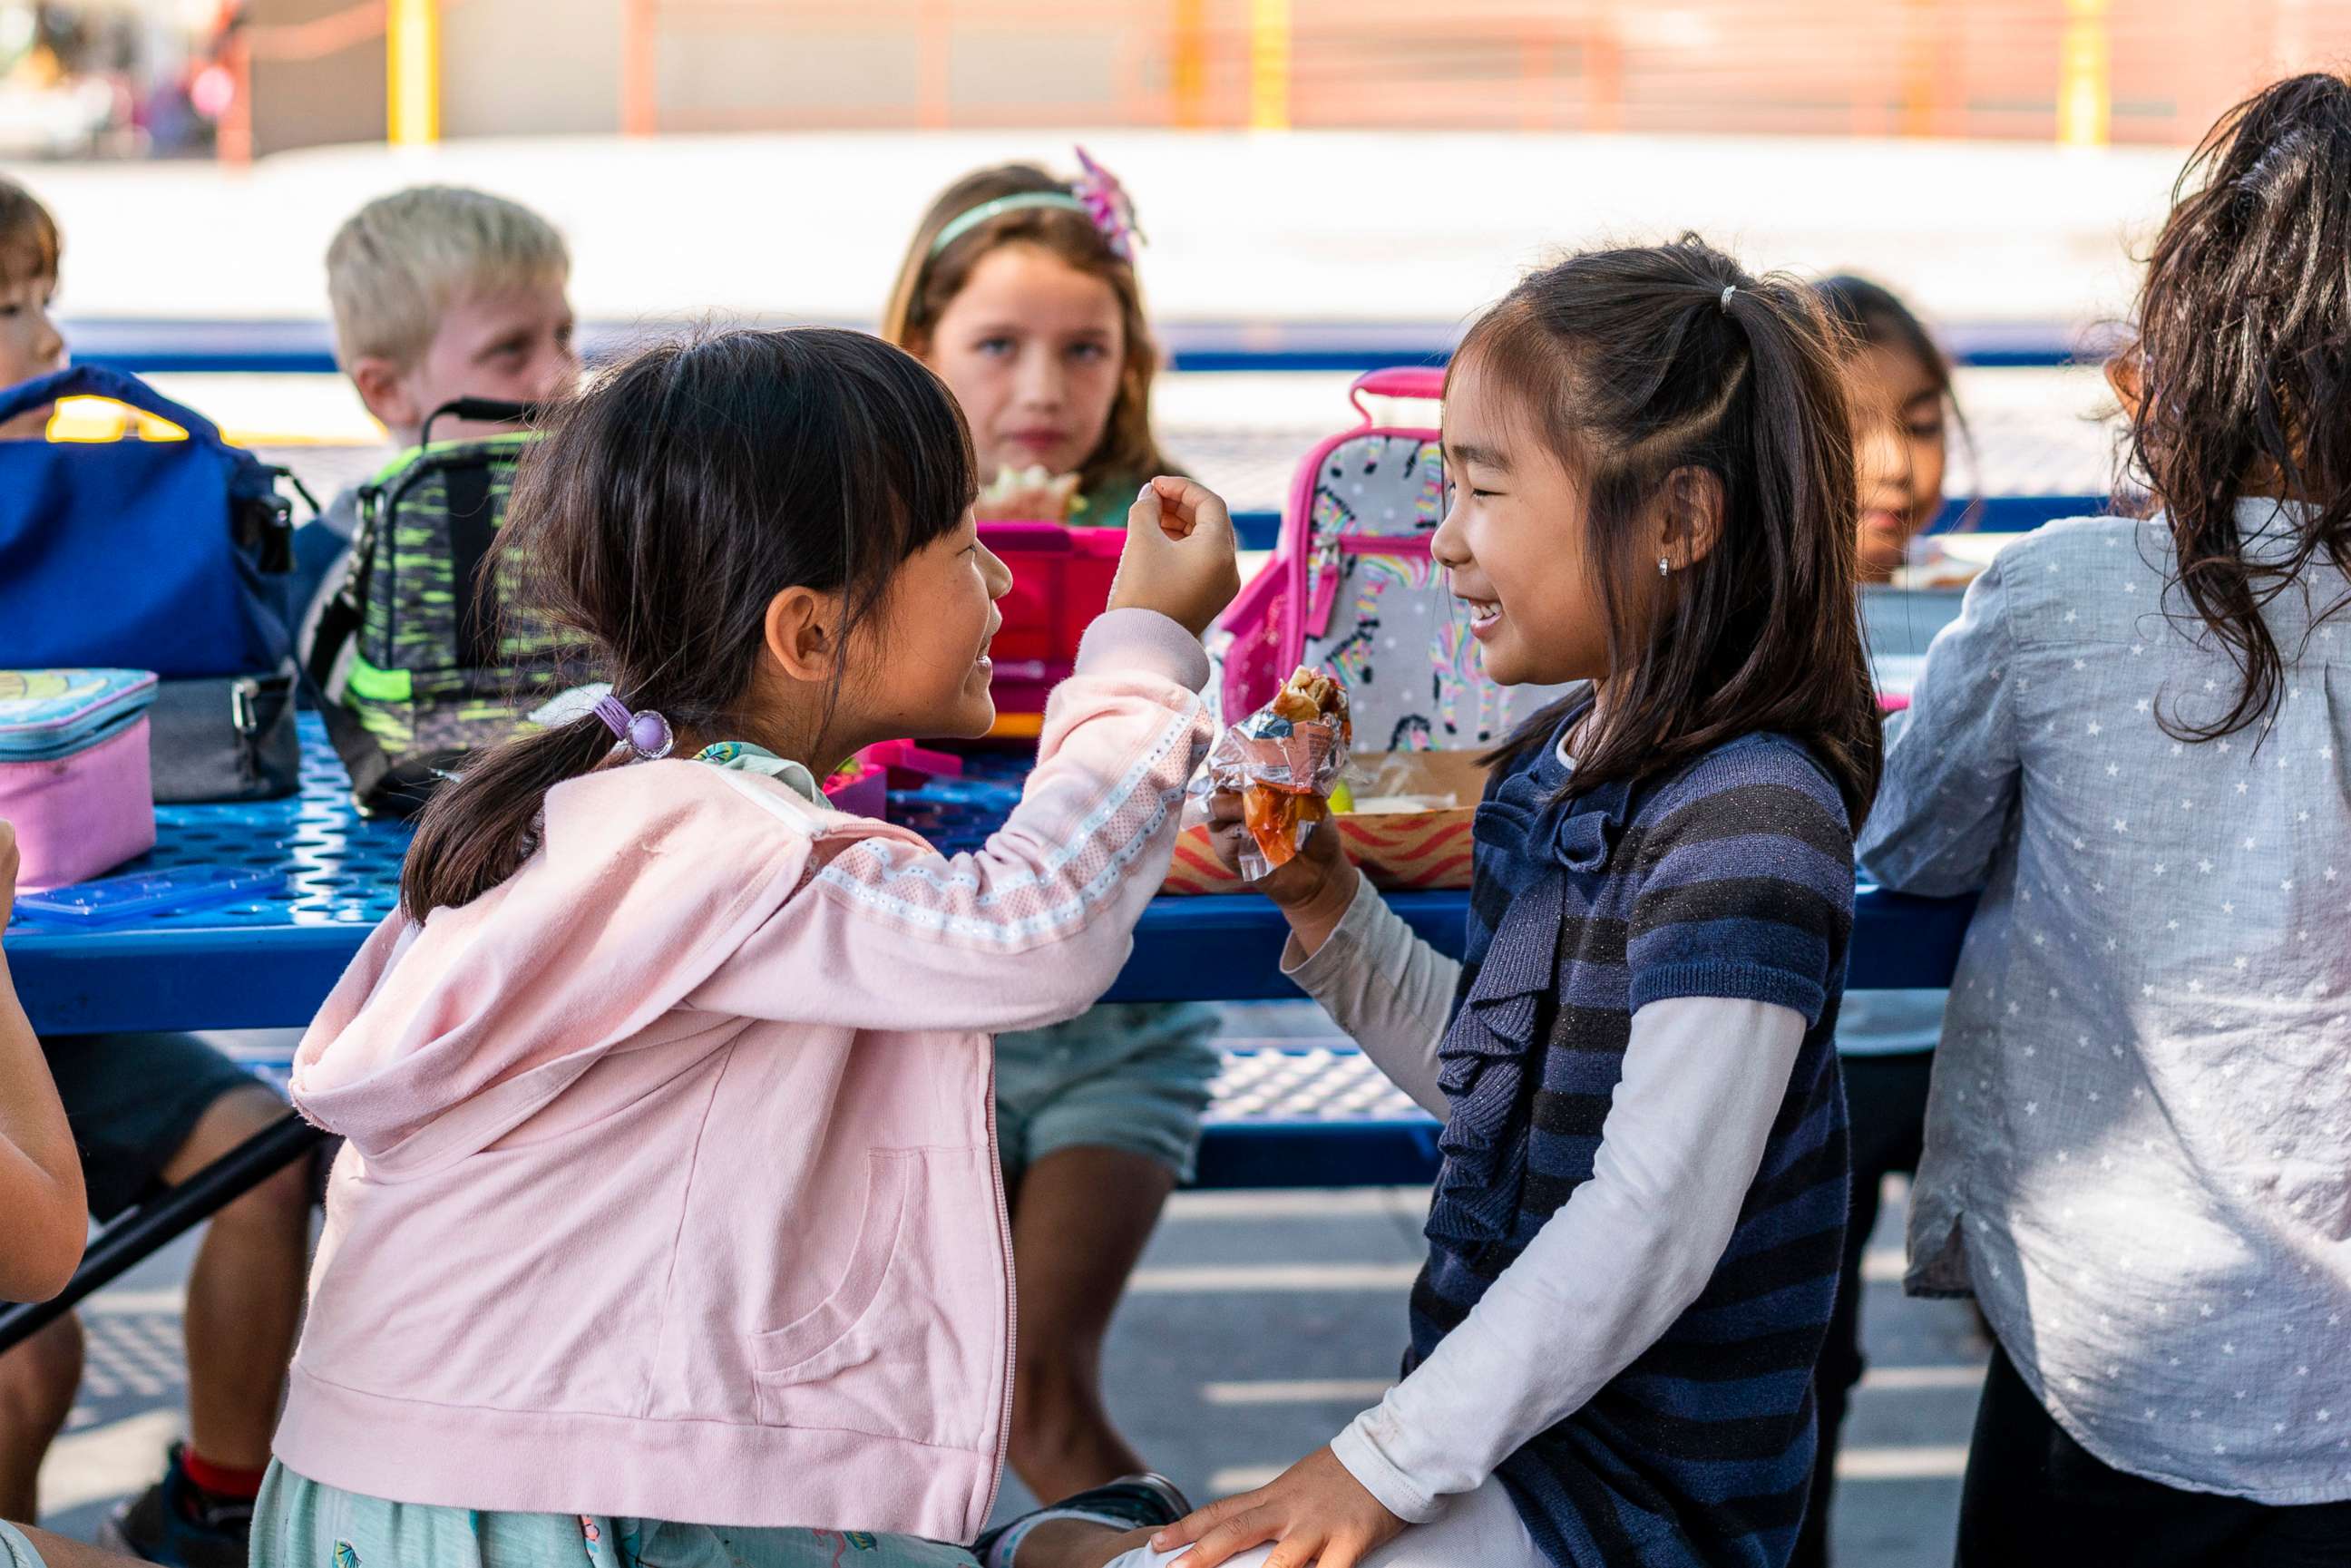 PHOTO: Students eat their lunch at the outdoor cafeteria at Bathgate Elementary School in Mission Viejo, Calif., Oct. 2, 2019.